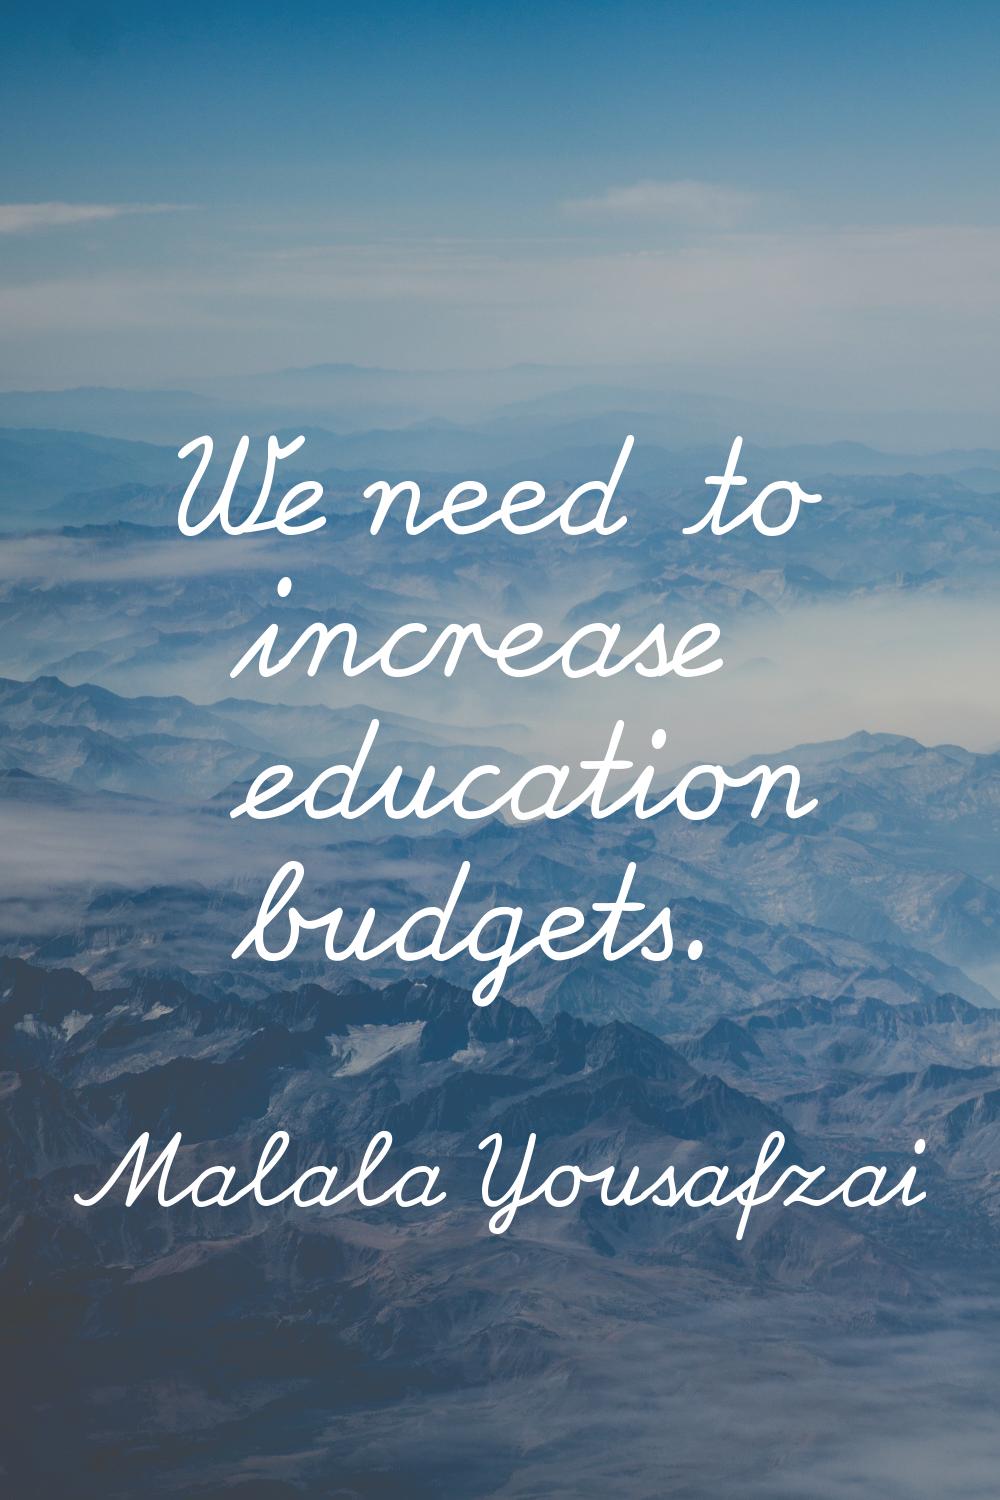 We need to increase education budgets.